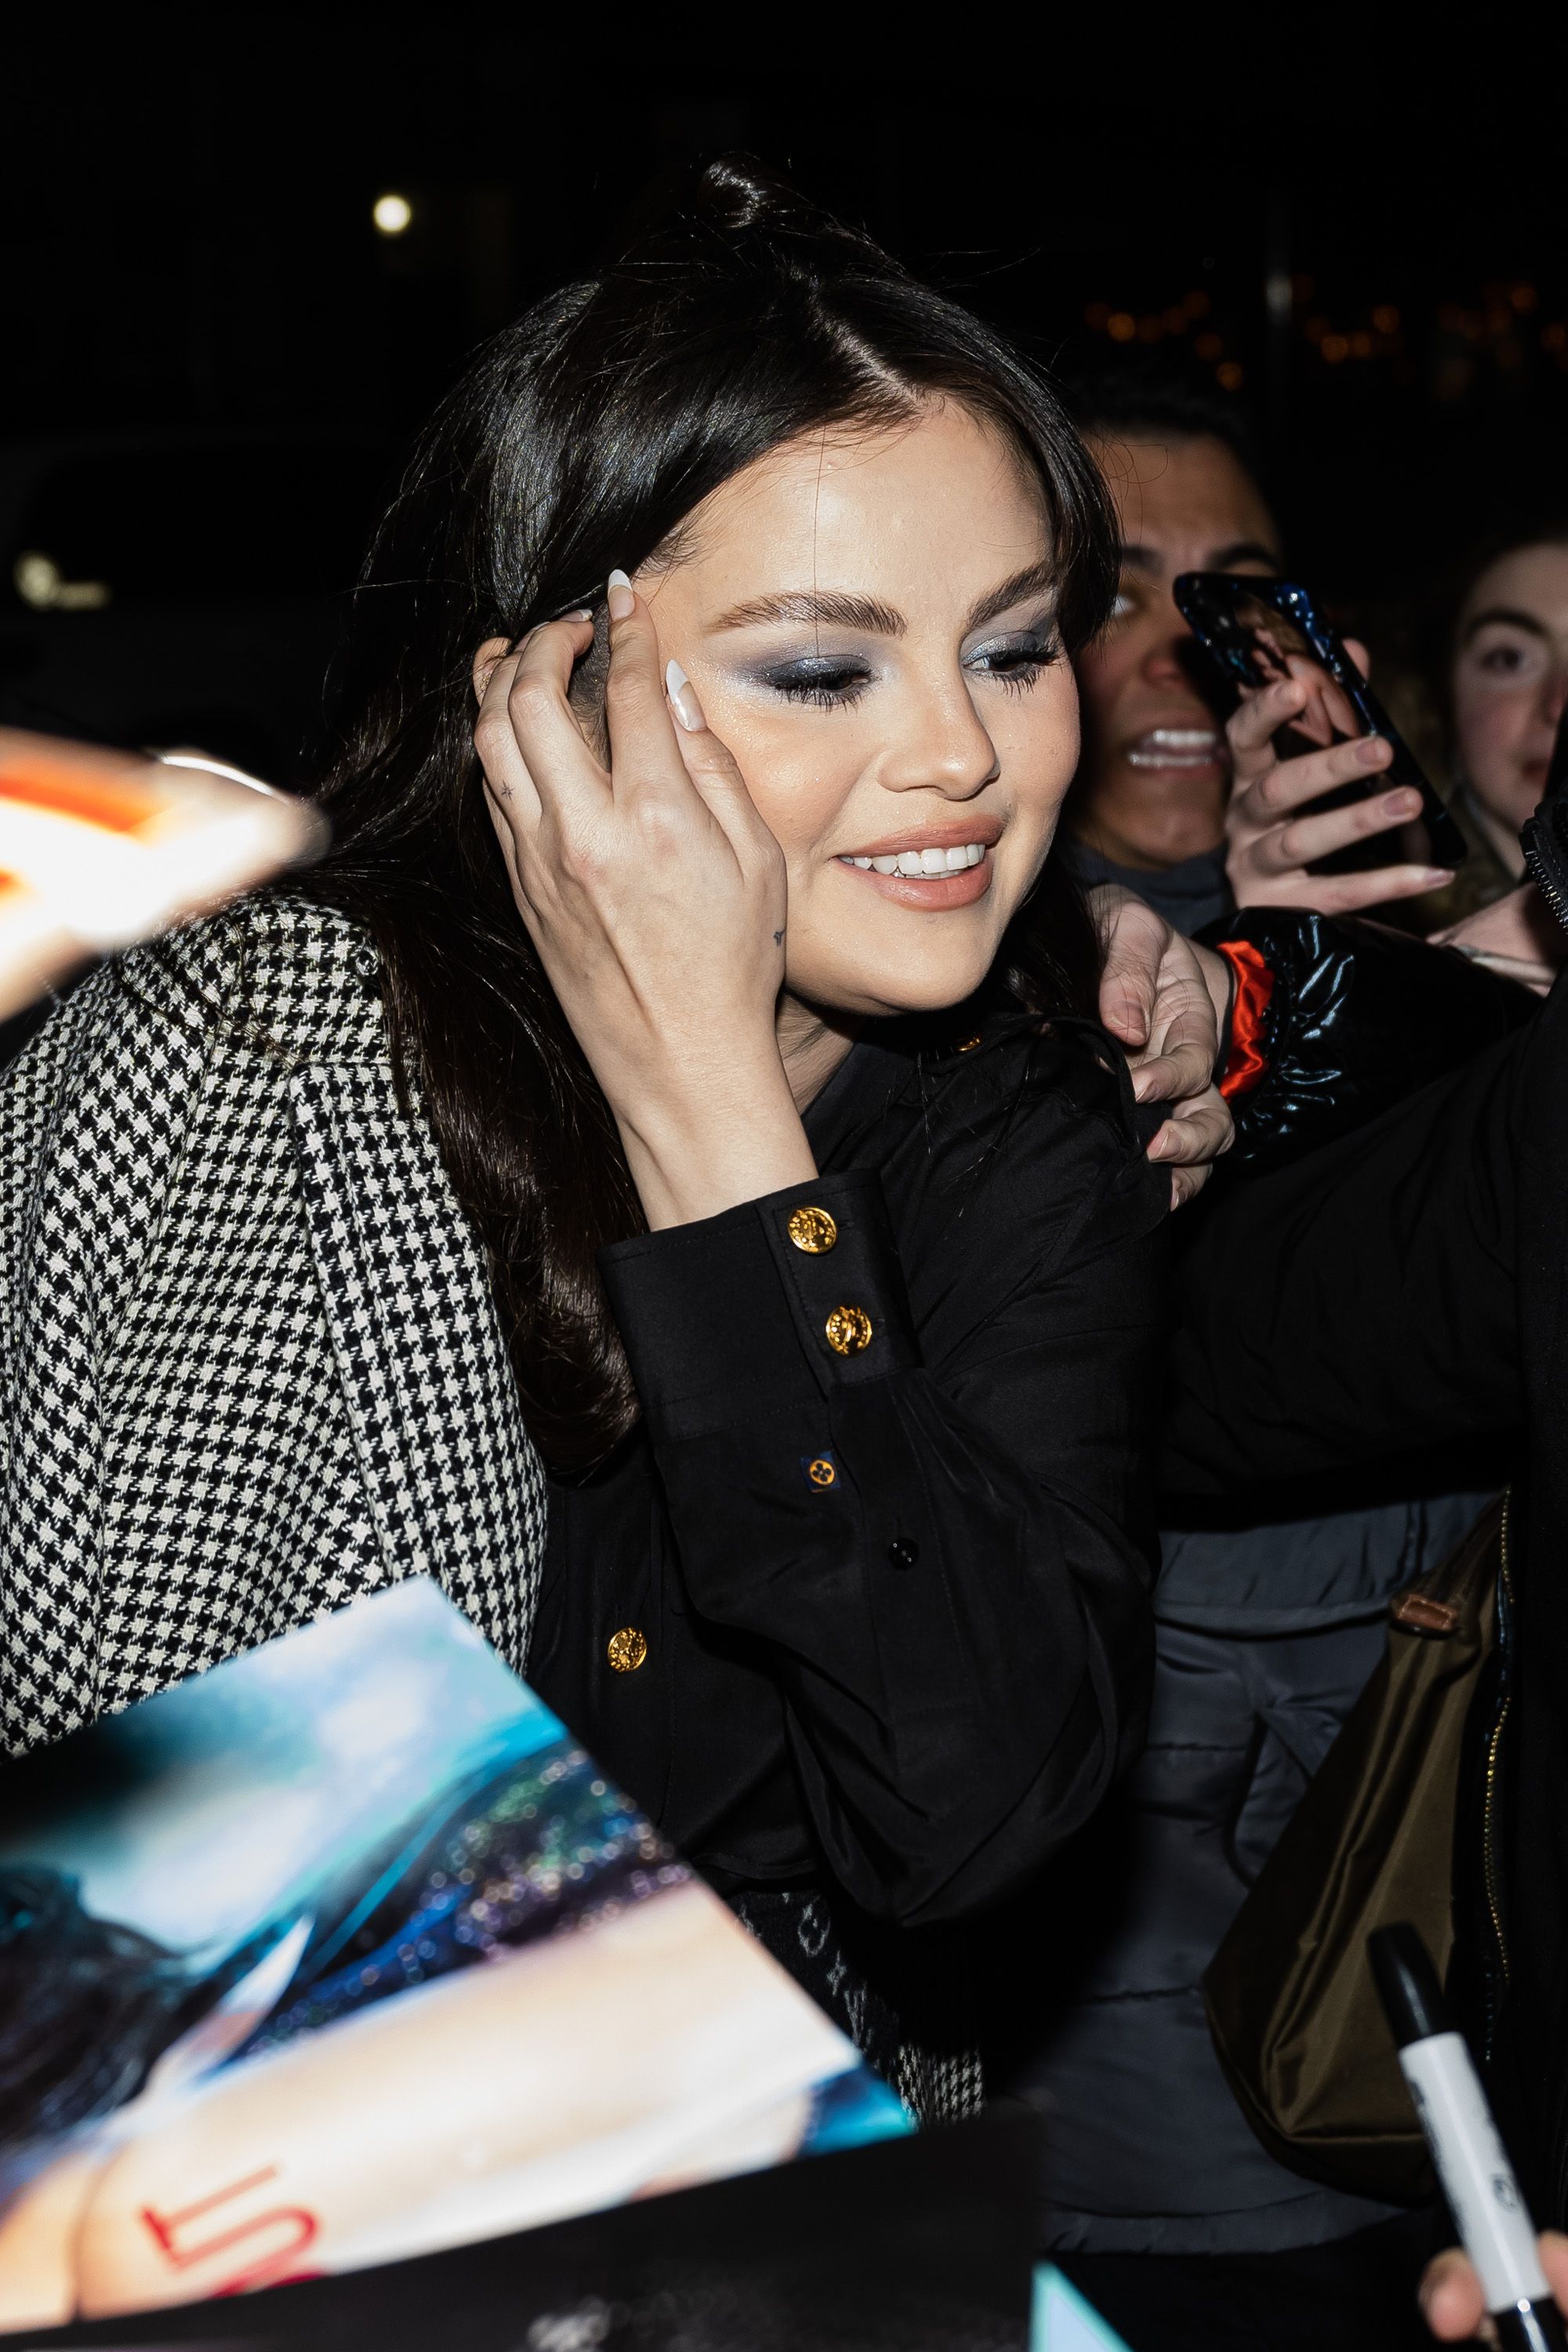 Selena Gomez Wears Miniskirt and Houndstooth Coat in NYC